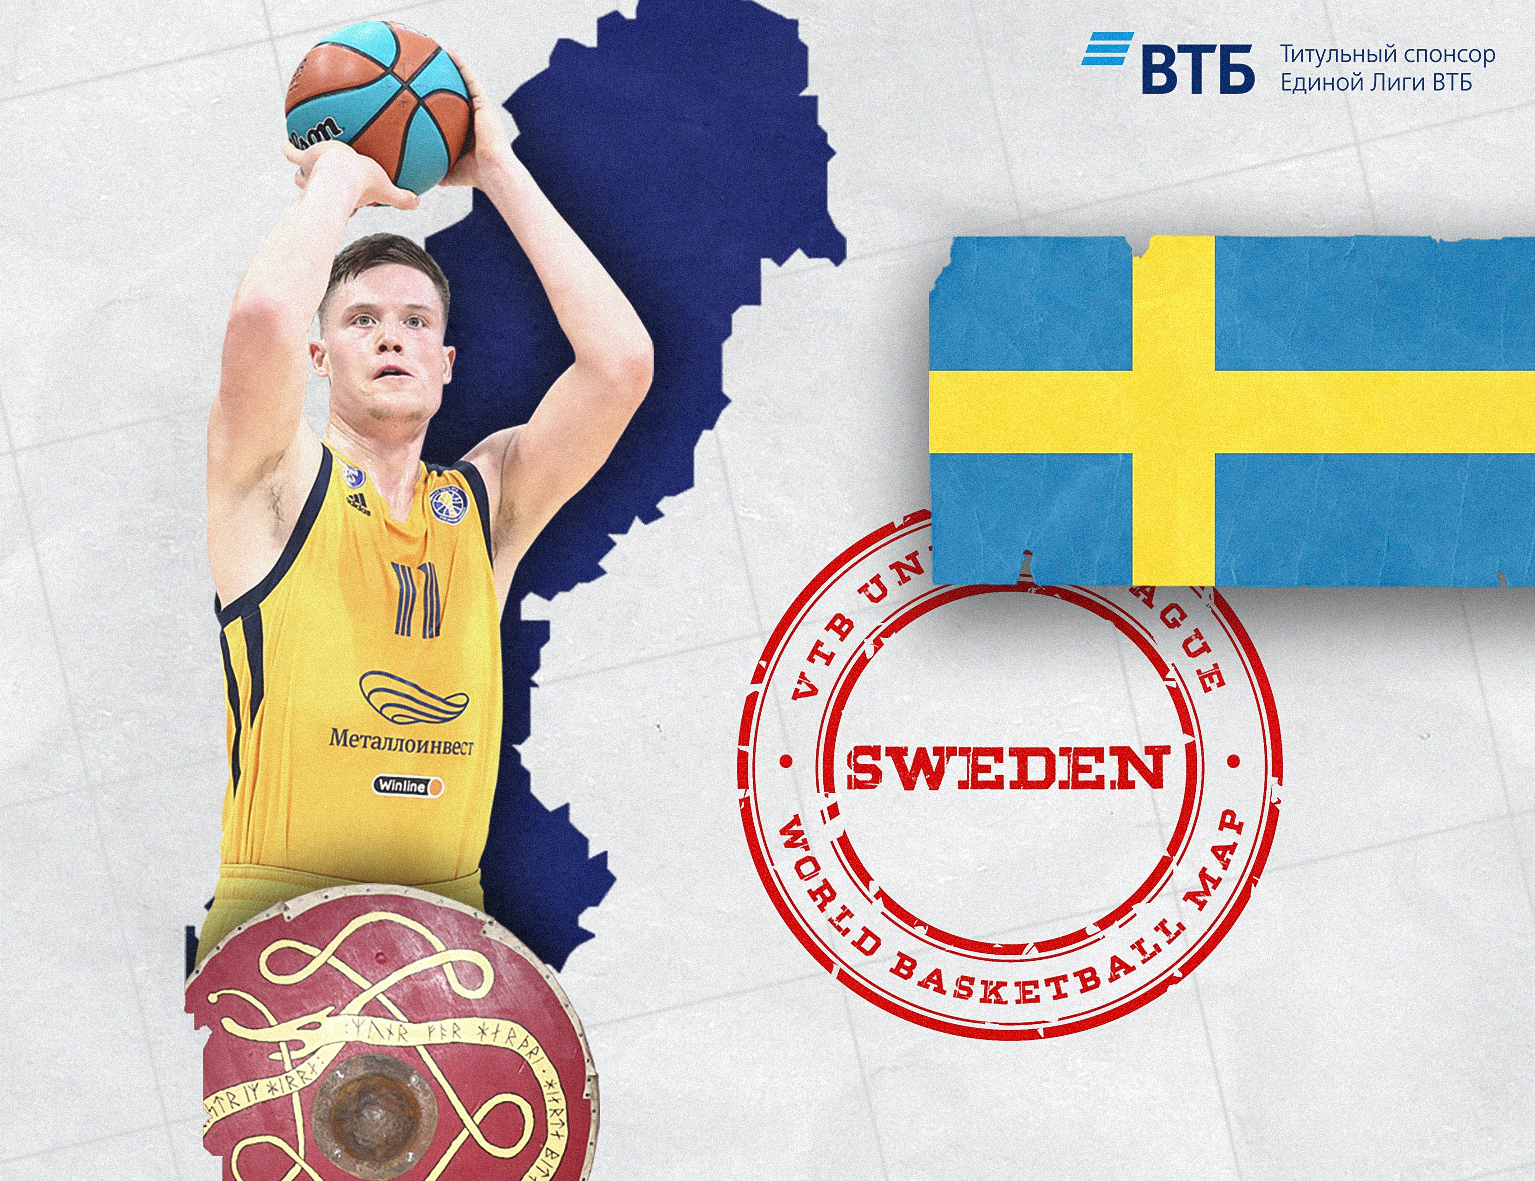 Basketball map of the world: Sweden